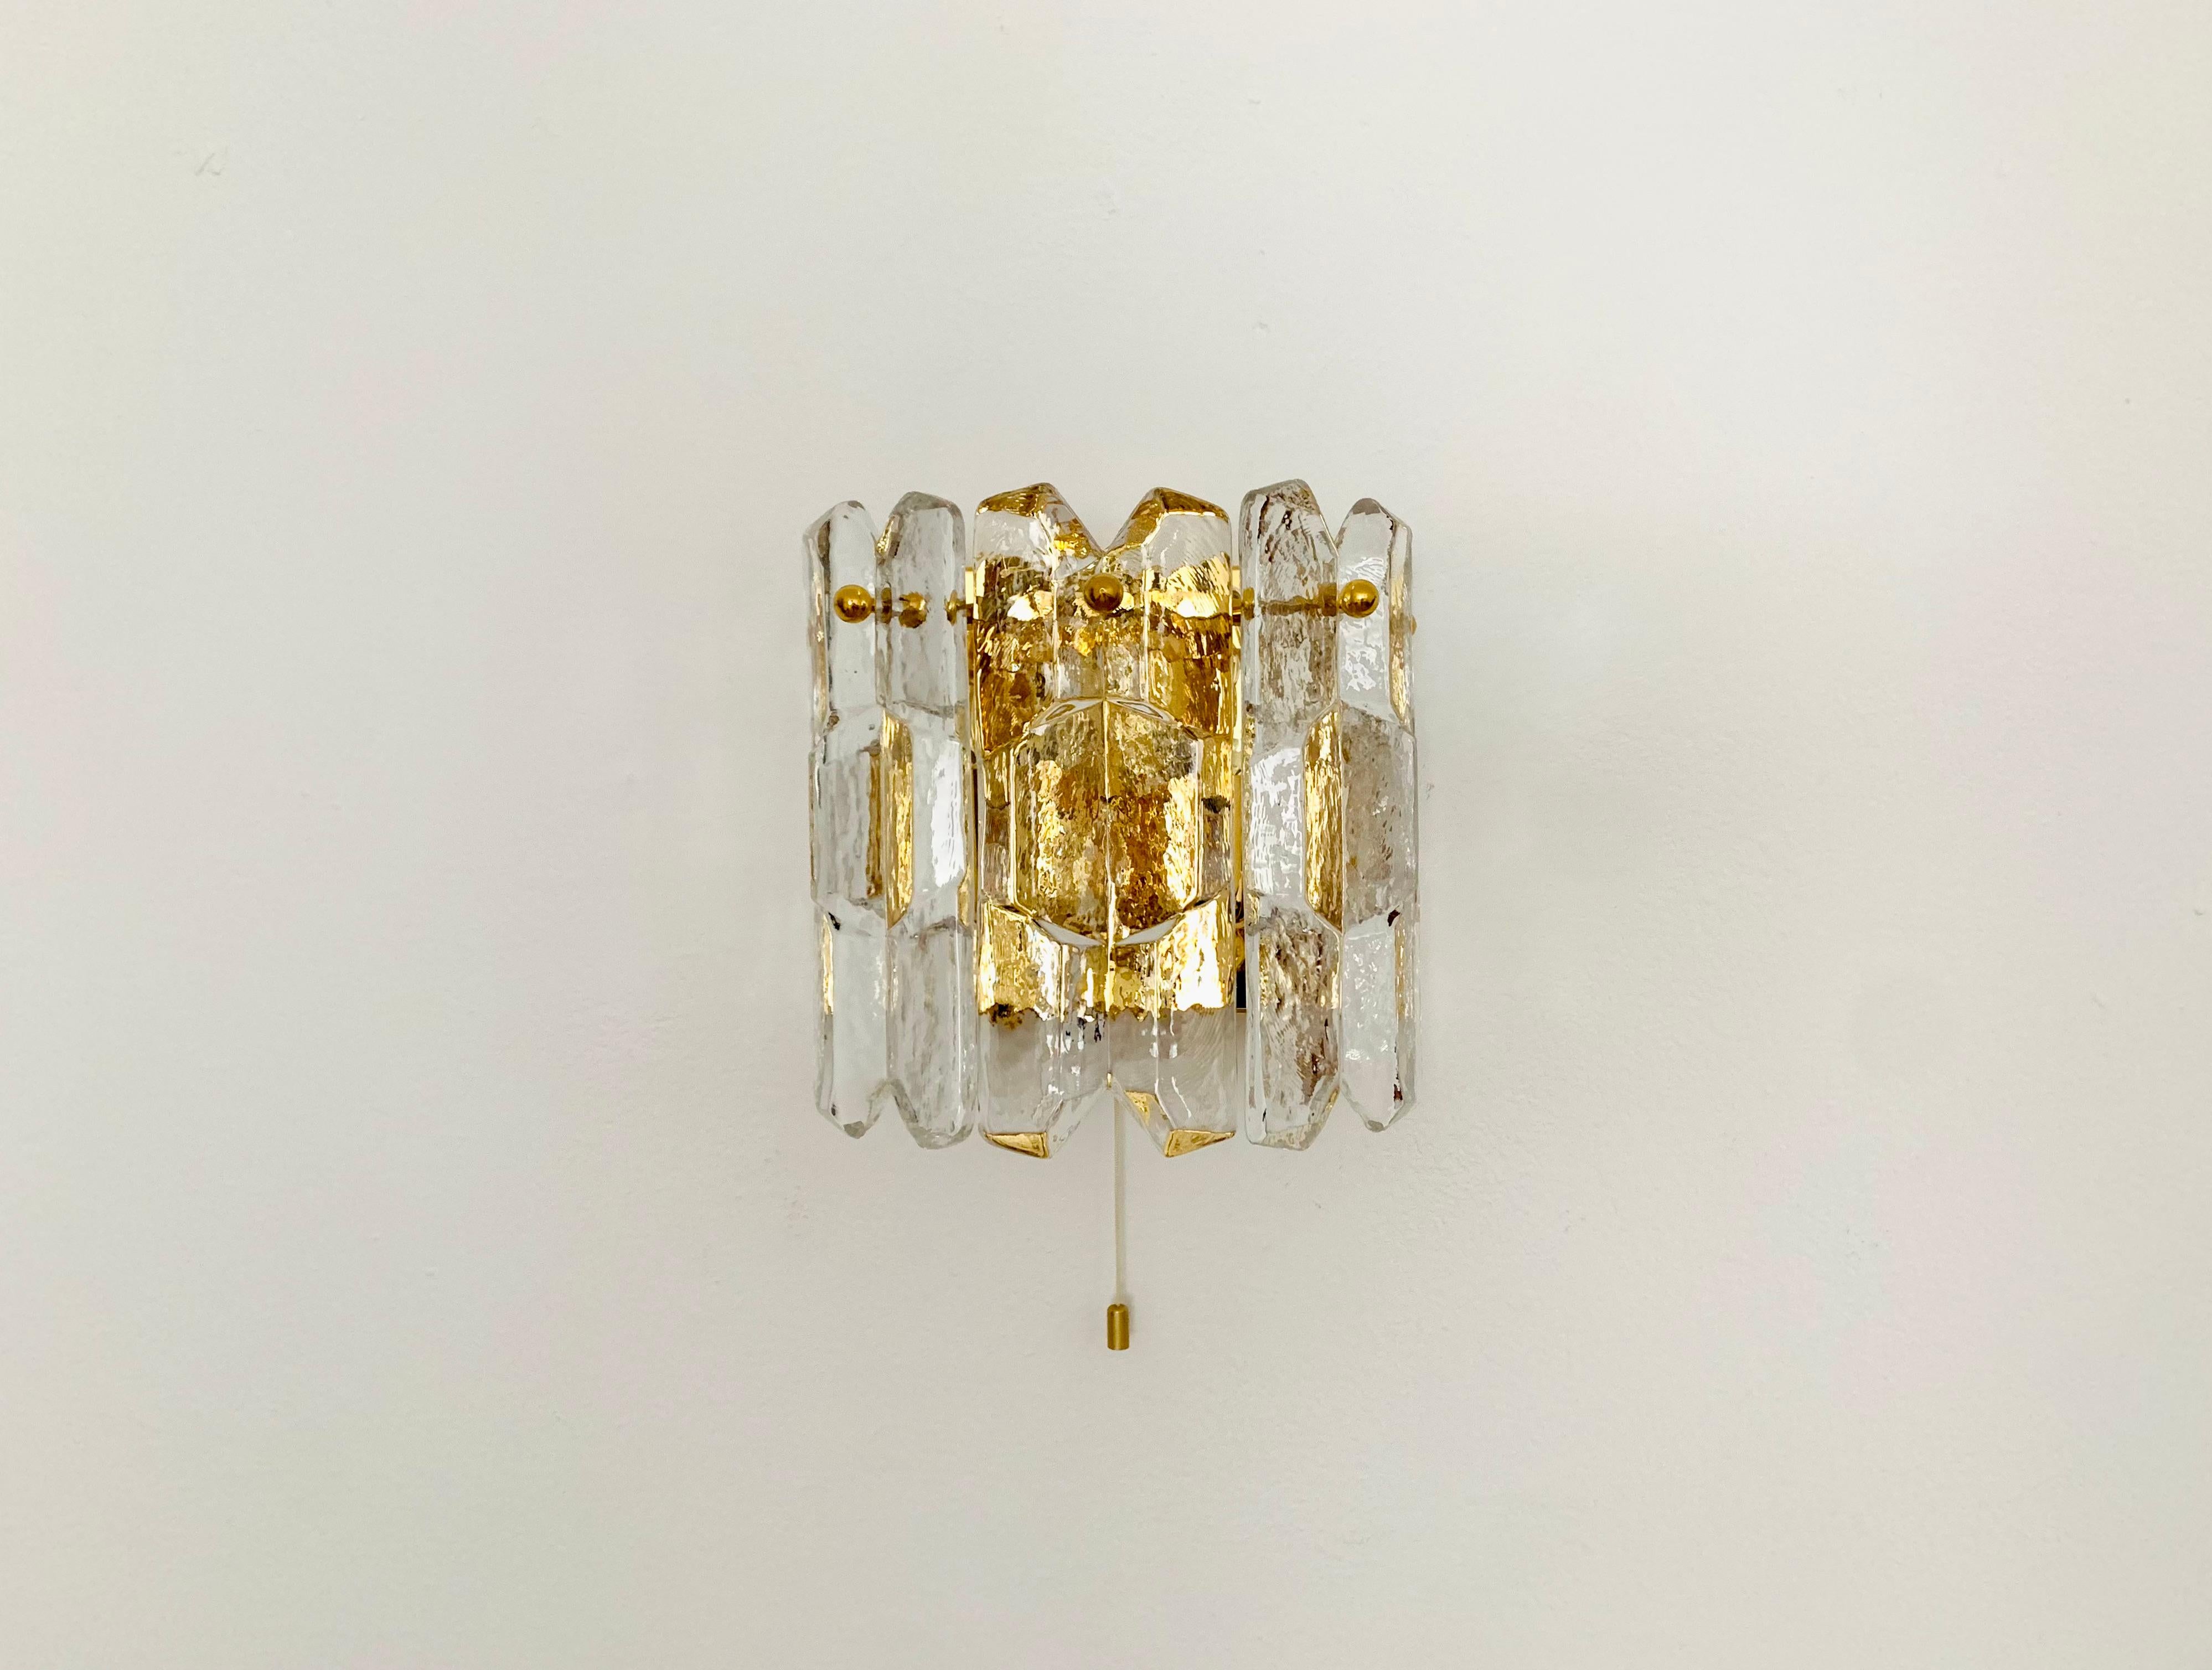 Very nice Palazzo wall lamp from the 1960s.
Very pleasant lighting effect due to the ice glass, which spreads an elegant, sparkling play of light in the room.
Great design and high-quality workmanship.

Manufacturer: Franken KG
Design: J.T.